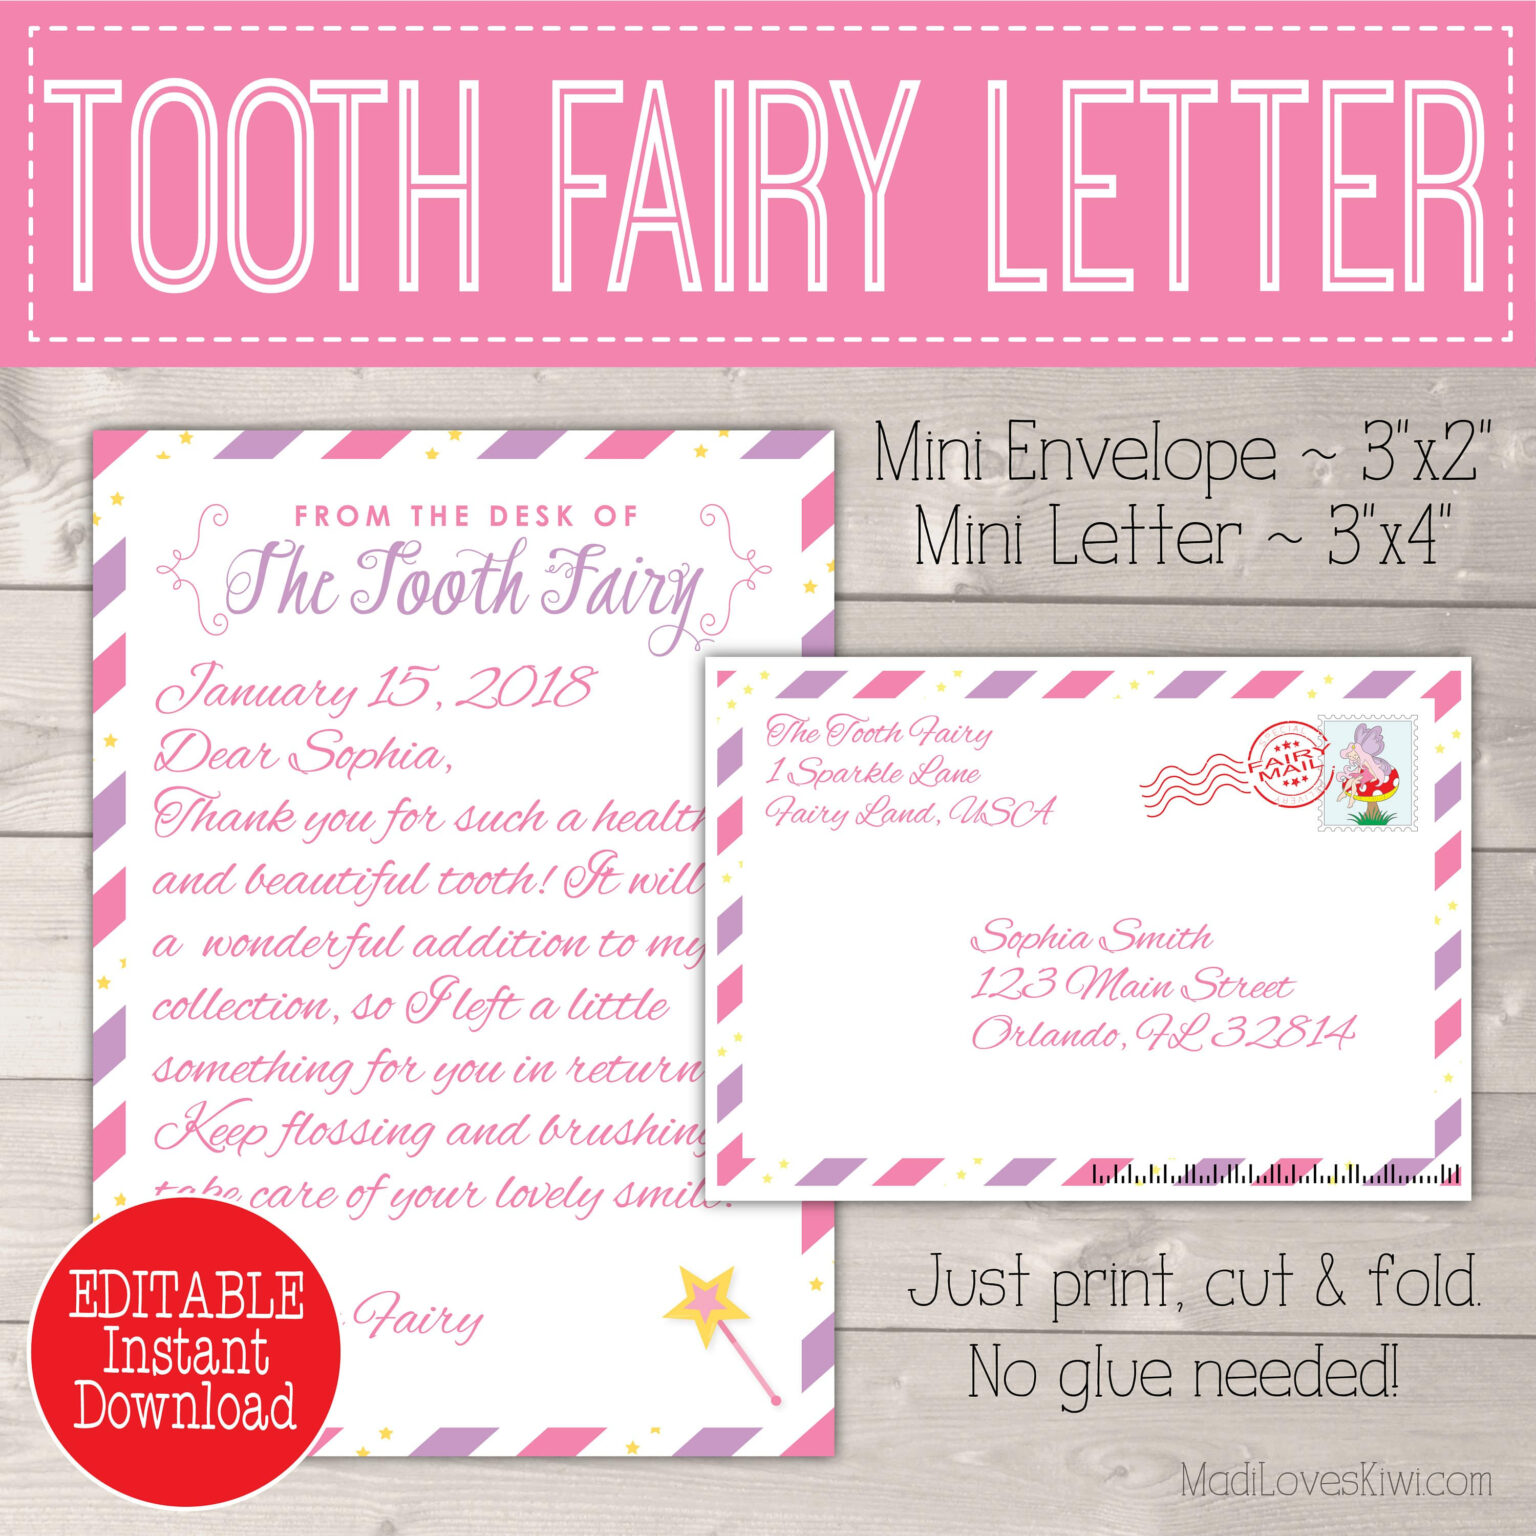 Editable Tooth Fairy Letter With Envelope Printable Pink Intended For